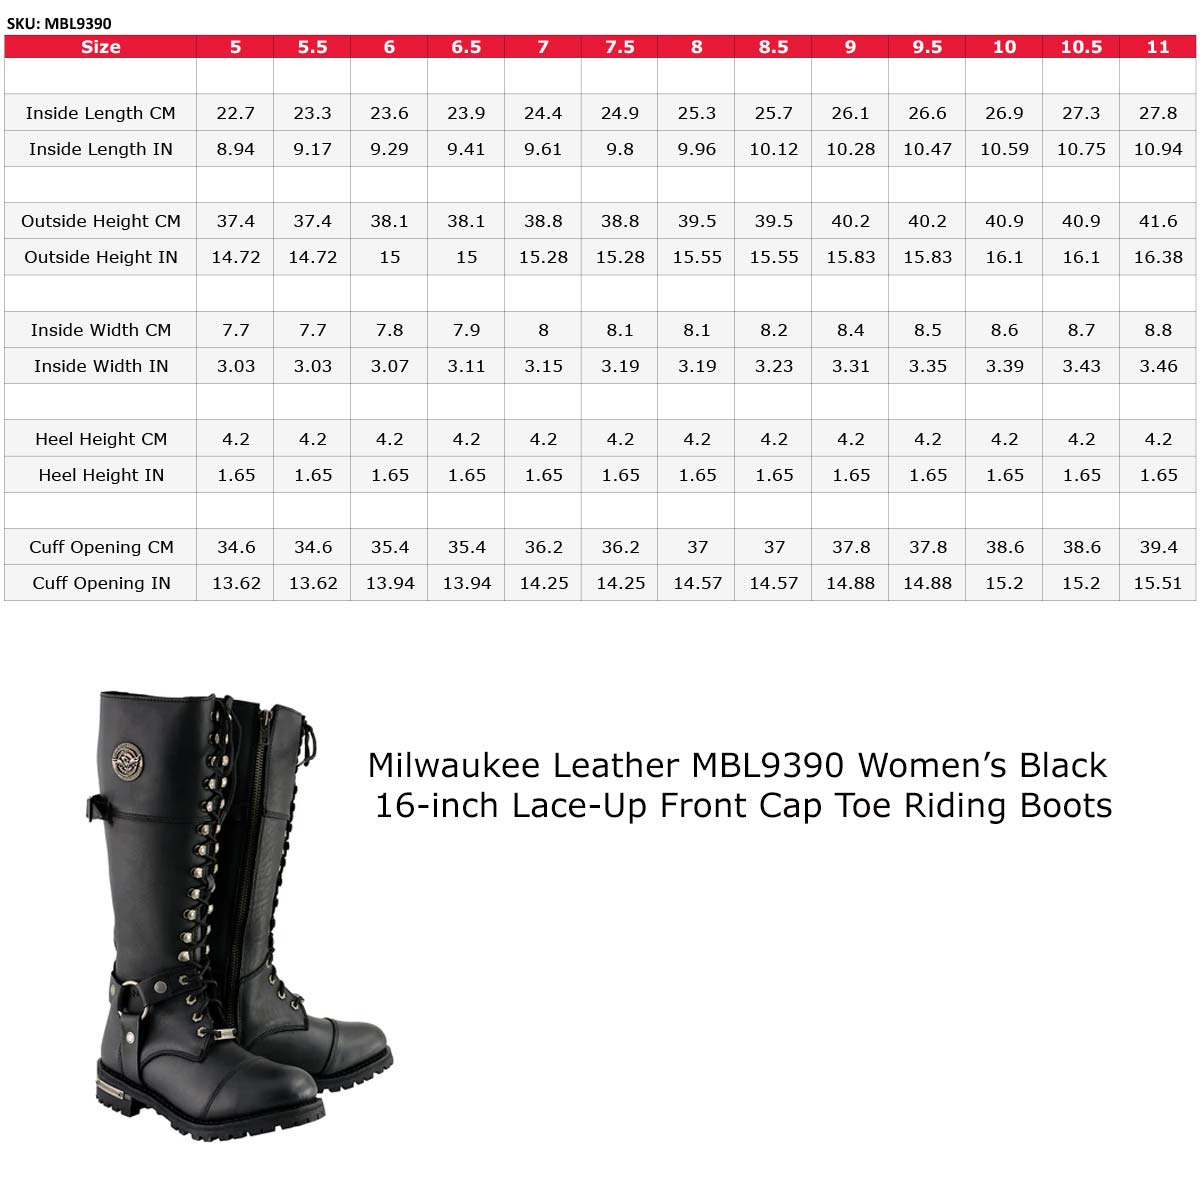 Milwaukee Leather MBL9390 Women’s Black 16-inch Lace-Up Front Cap Toe Motorcycle Riding Leather Boots